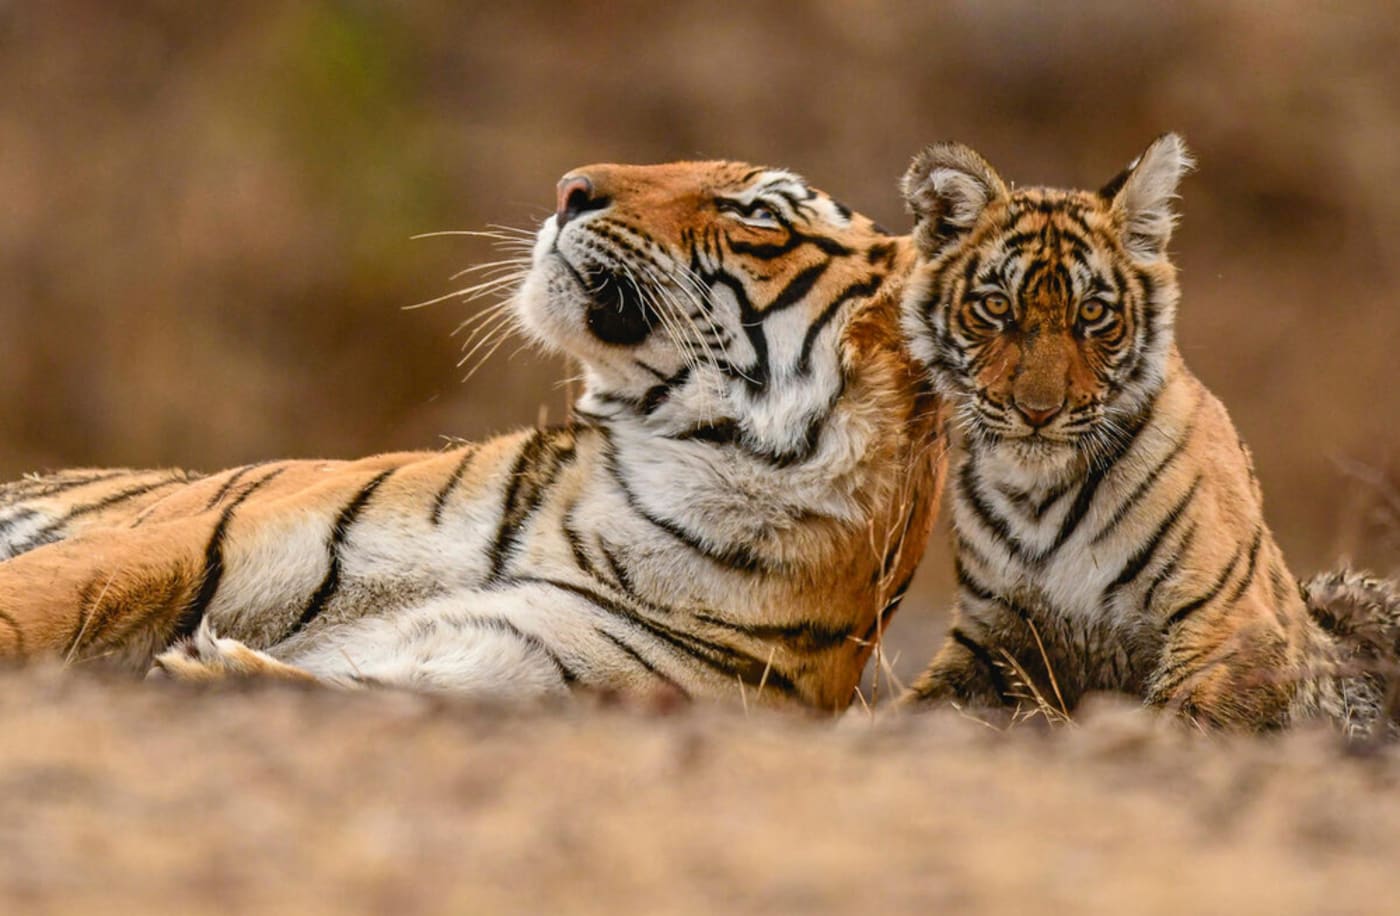 A tiger is laying on the ground while her cub sits alongside her and looks towards the camera.